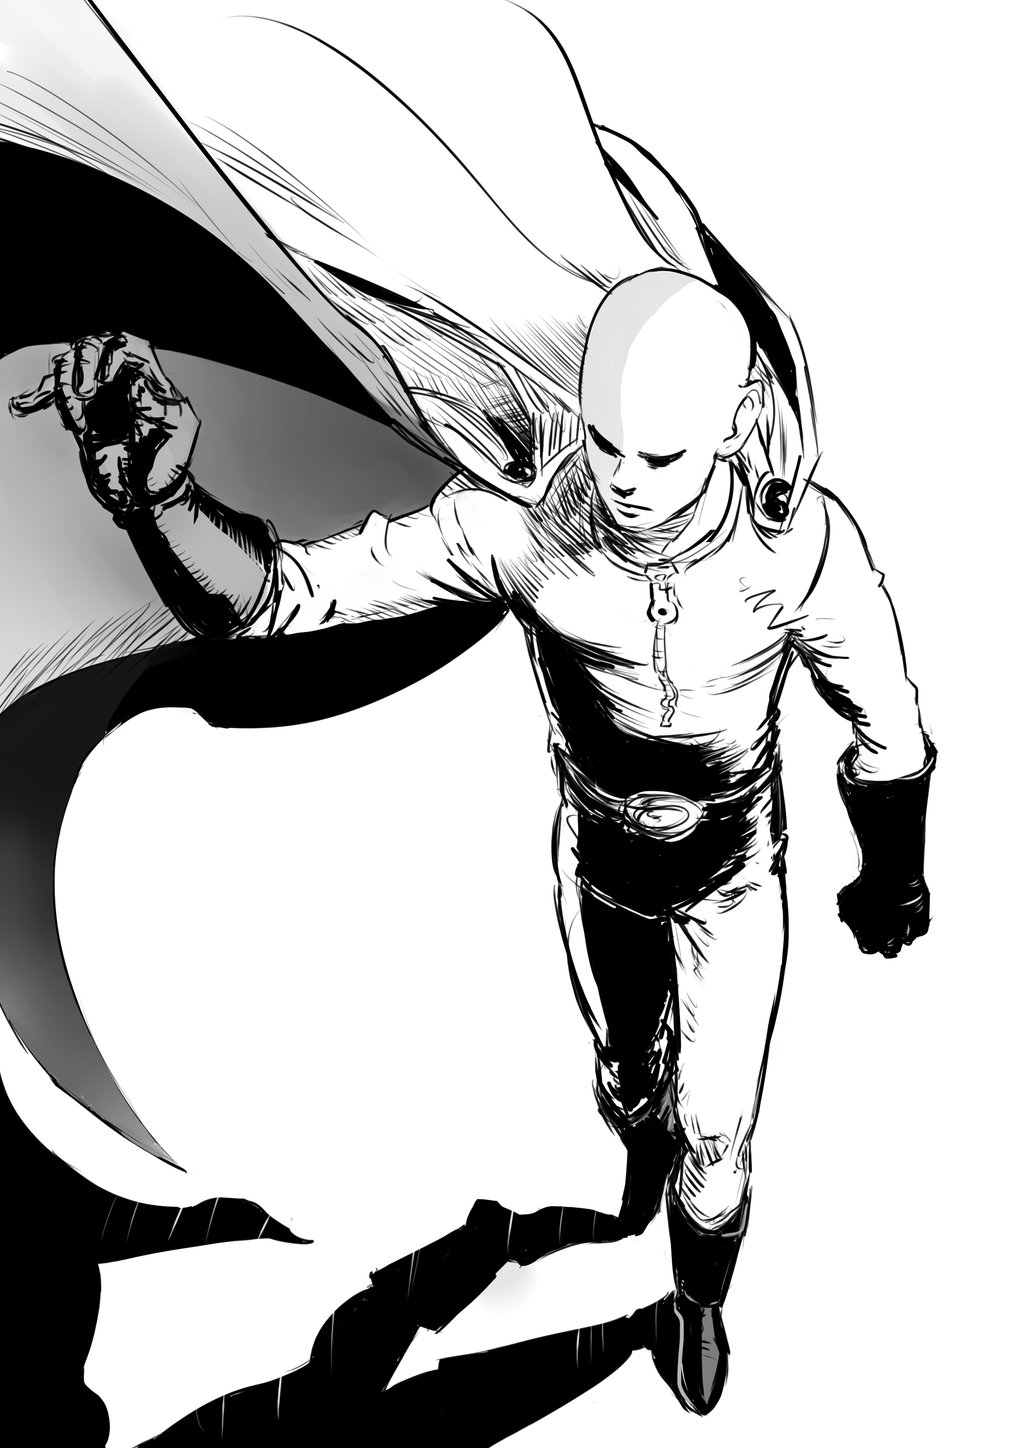 One-Punch Man Wallpapers High Quality | Download Free